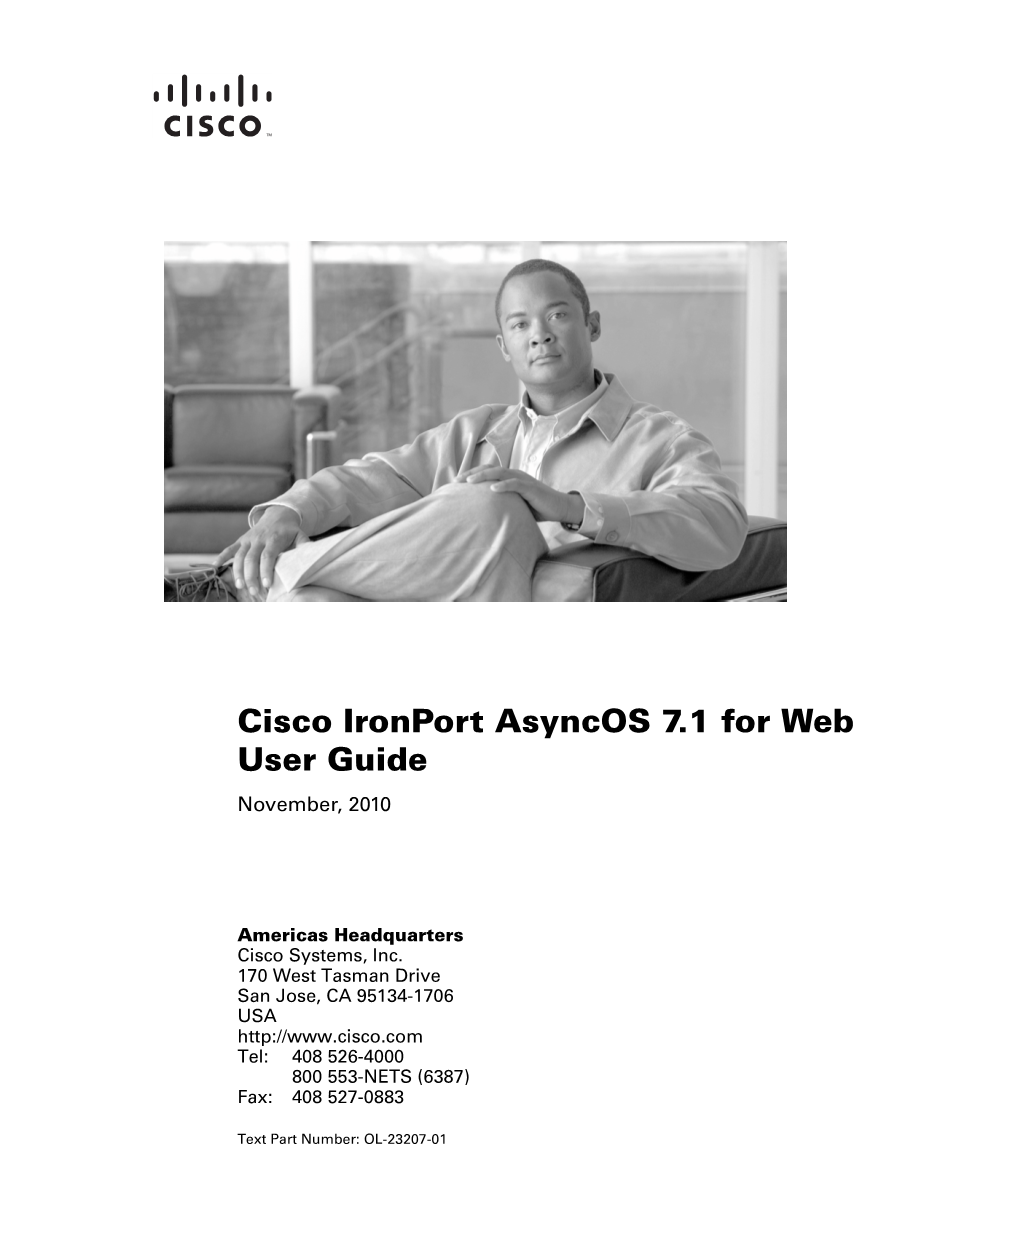 Cisco Ironport Asyncos 7.1.0 User Guide for Web Security Appliances